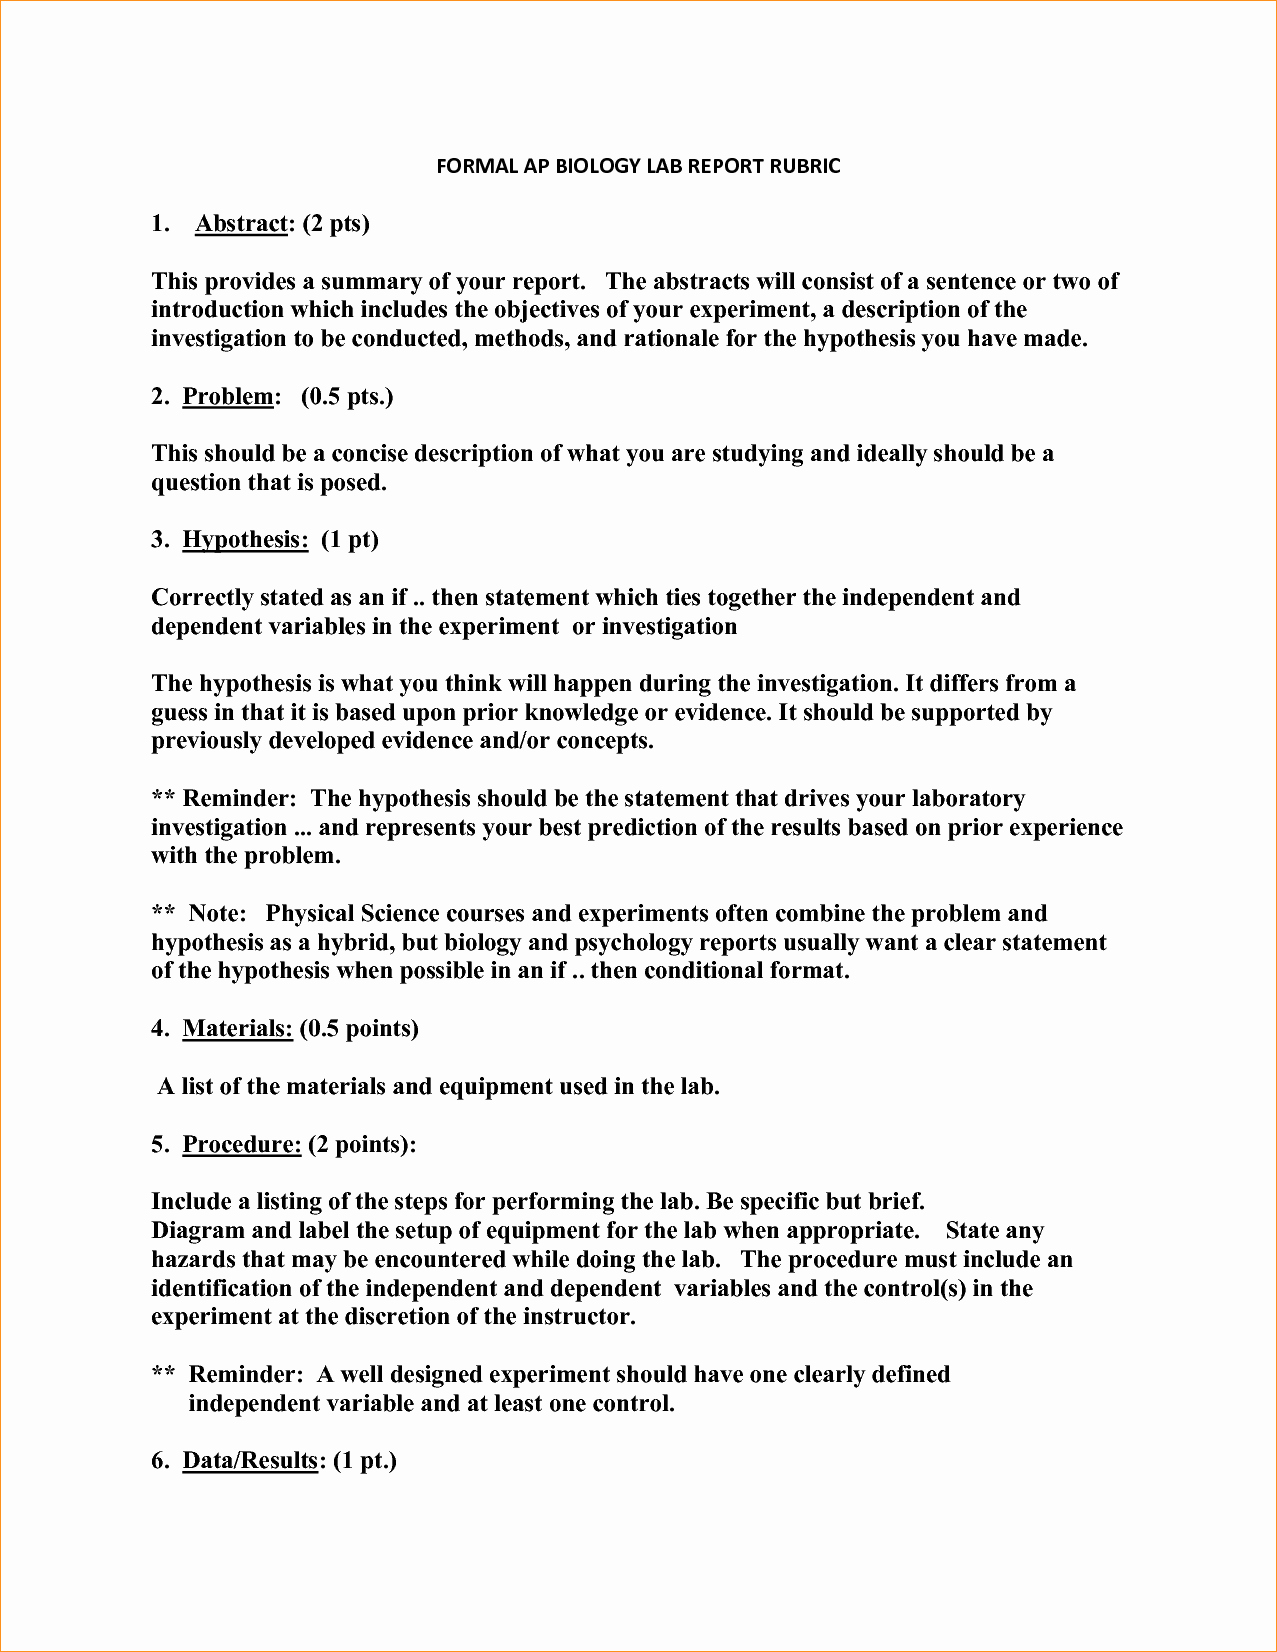 Formal Lab Report Template Fresh Lab Report format